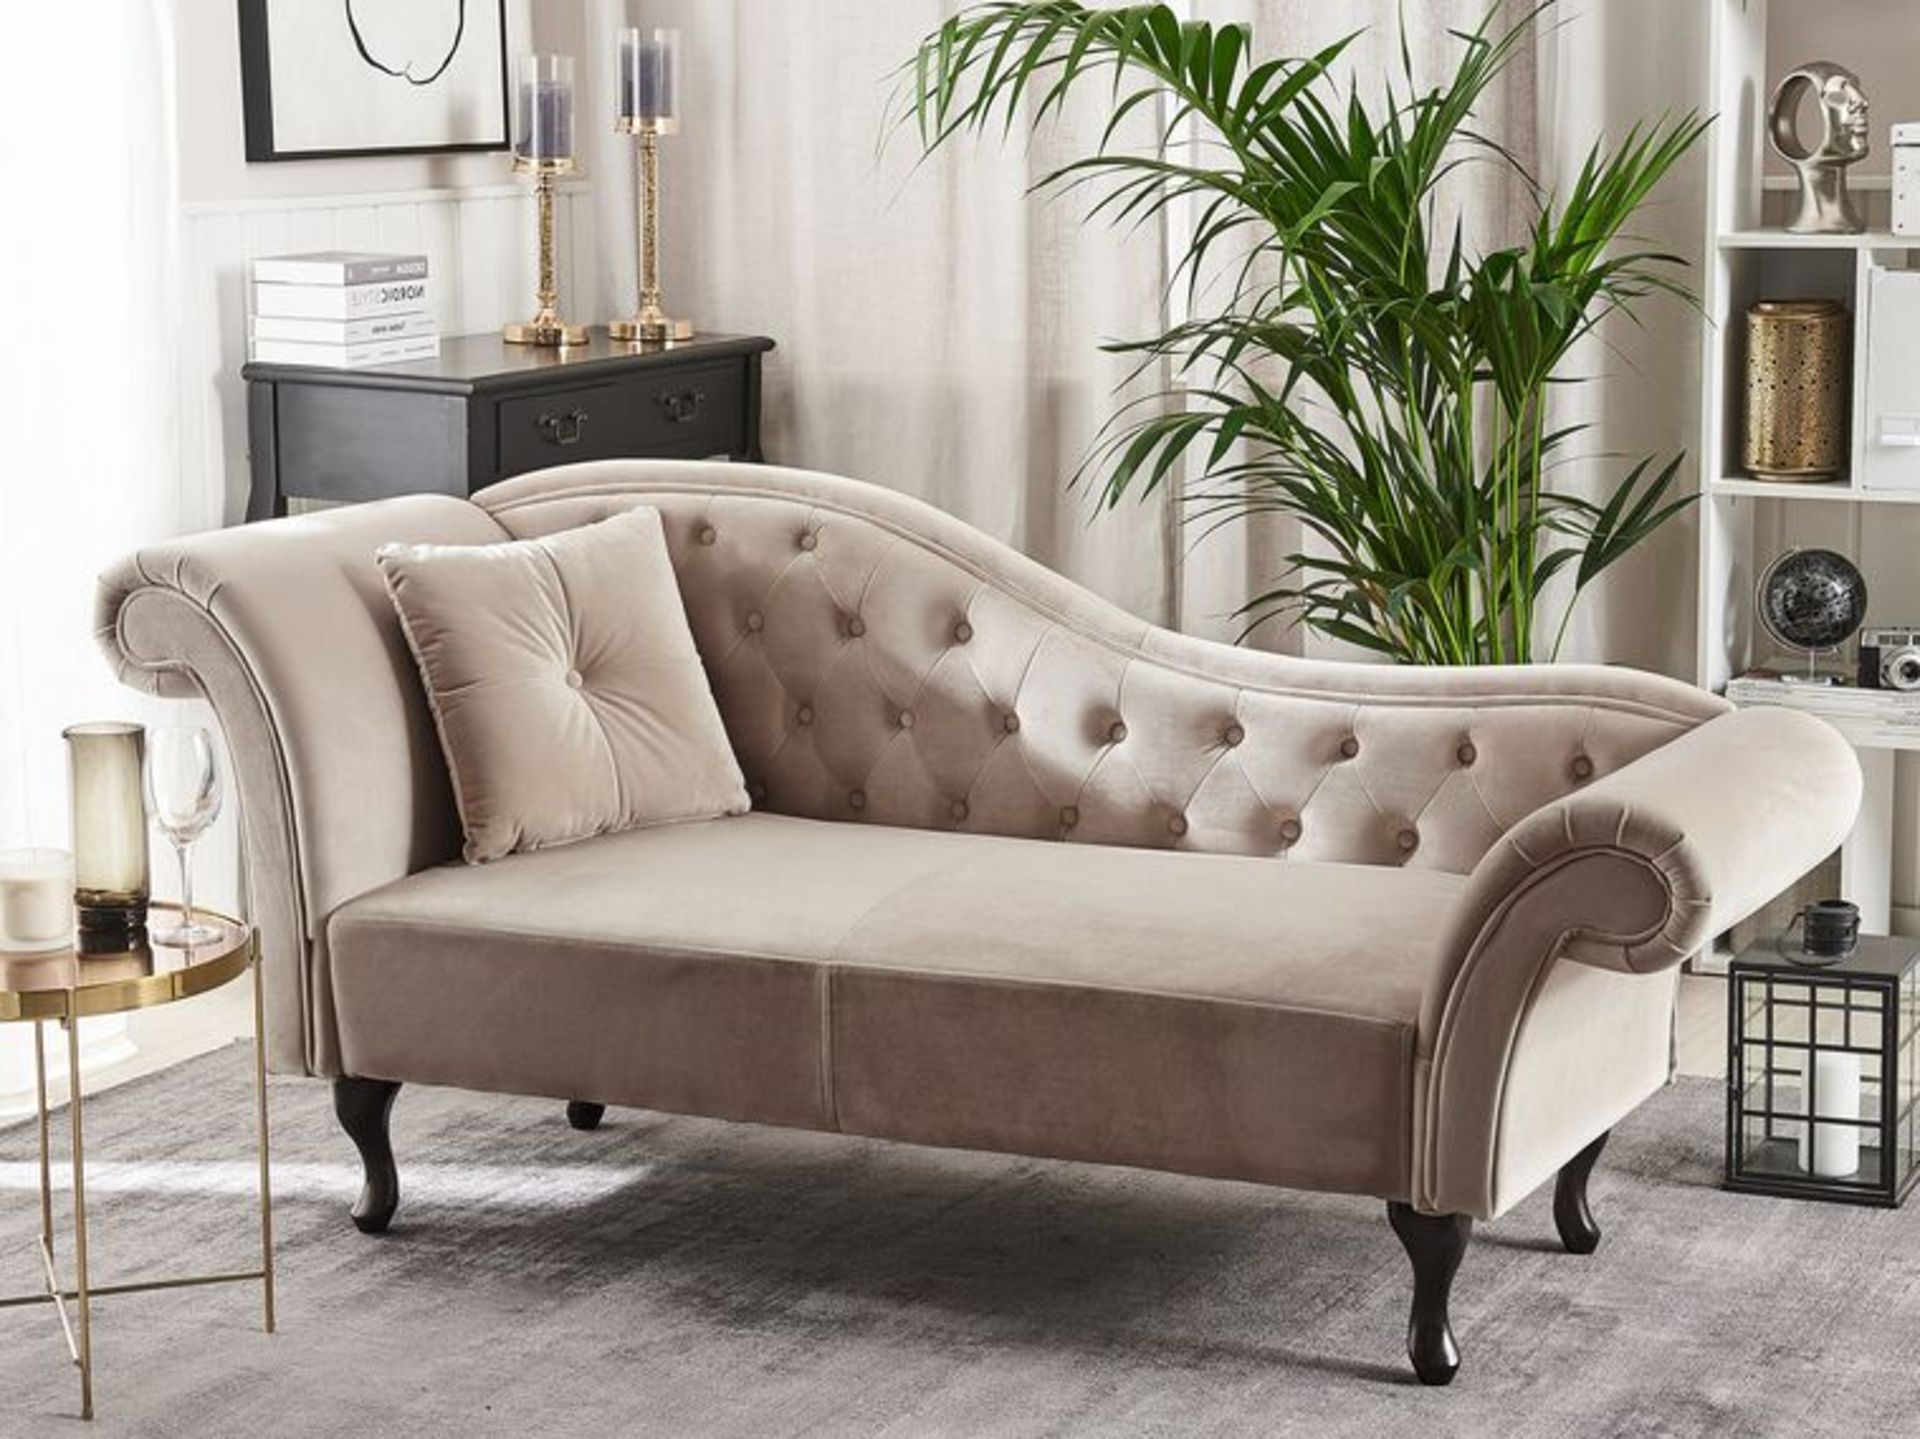 Lattes Left Hand Chaise Lounge Velvet Beige. - R14. RRP £779.99. This classic chaise lounge is the - Image 2 of 2